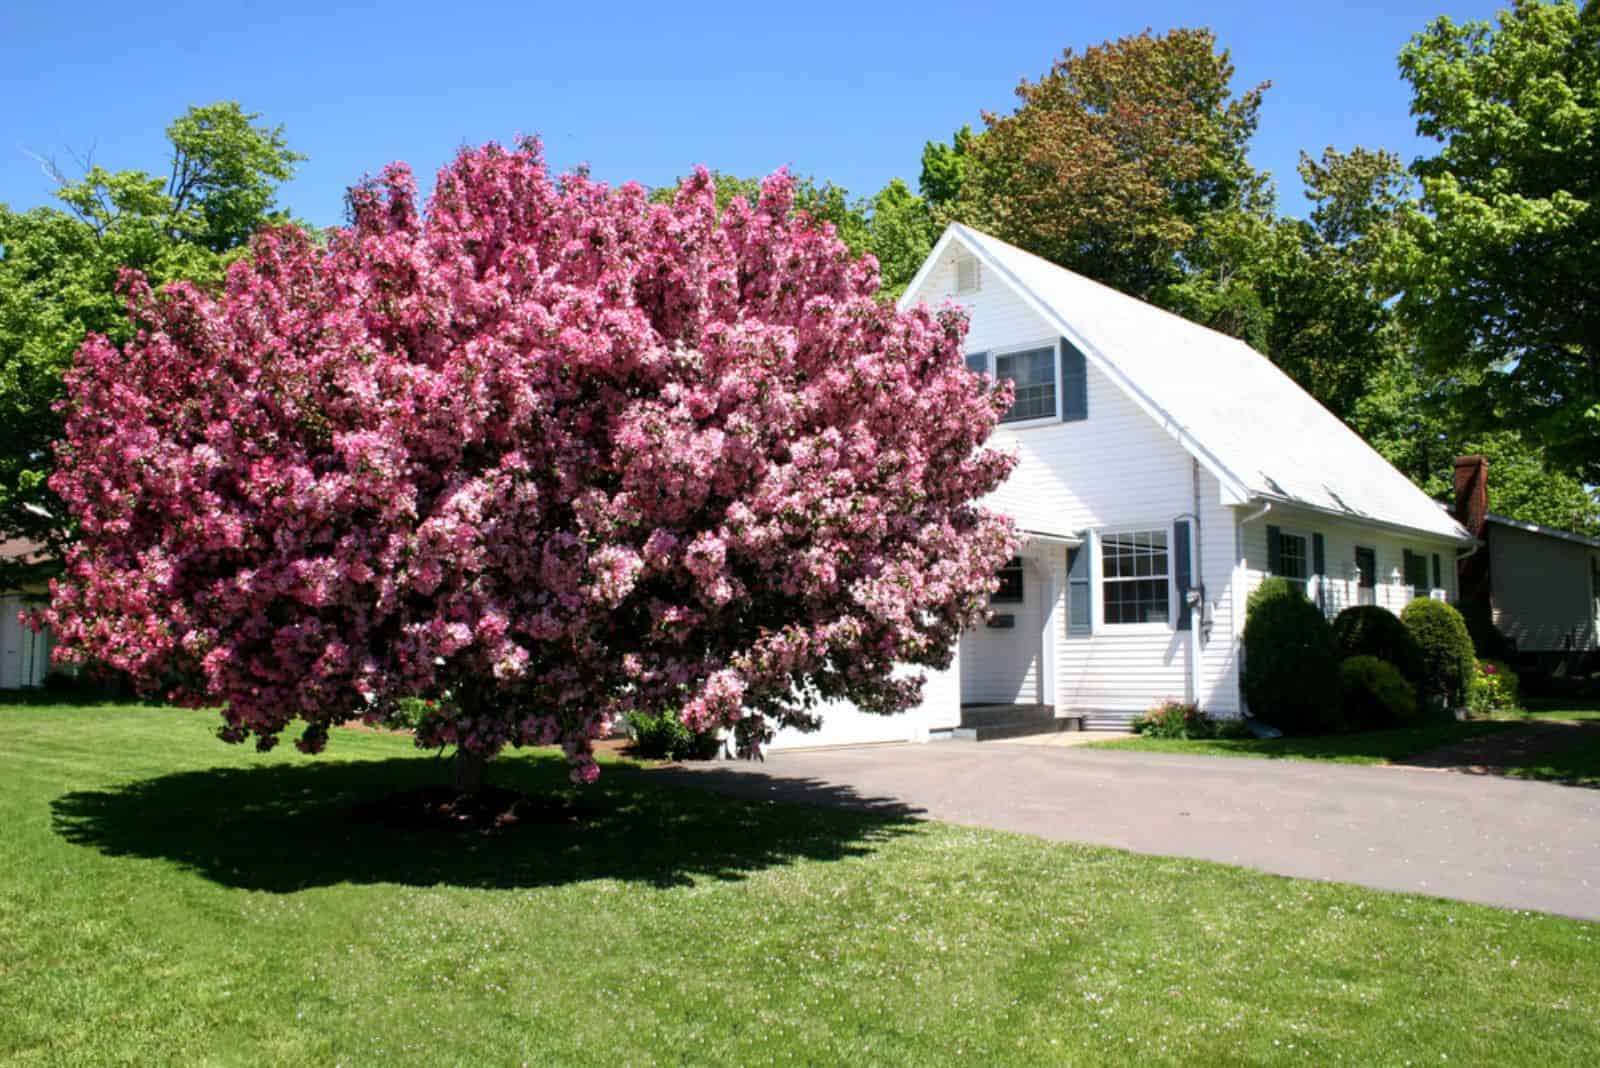 Pink flowering crabapple tree beside a neat white house